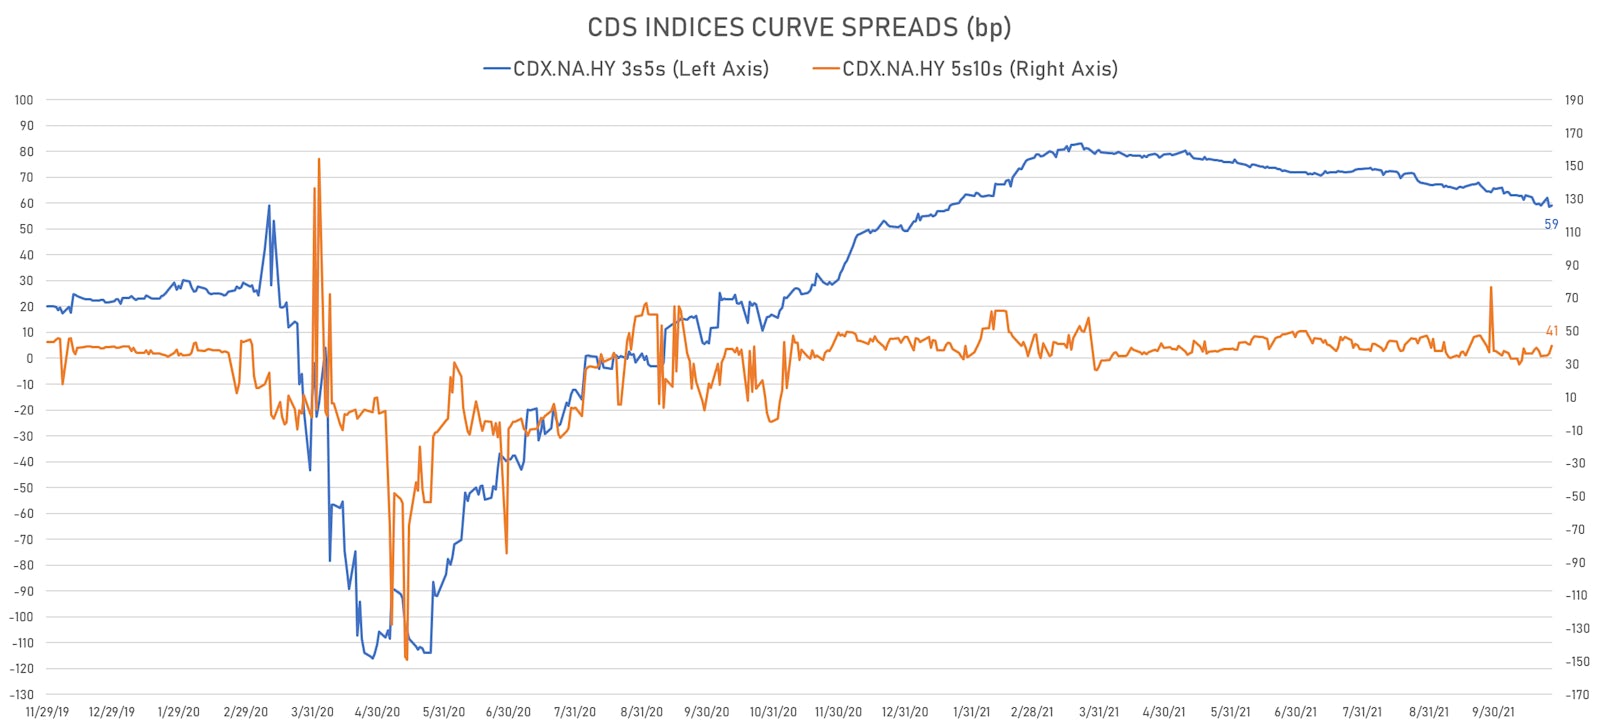 CDX High Yield Credit Curve Spreads | Sources: ϕpost, Refinitiv data